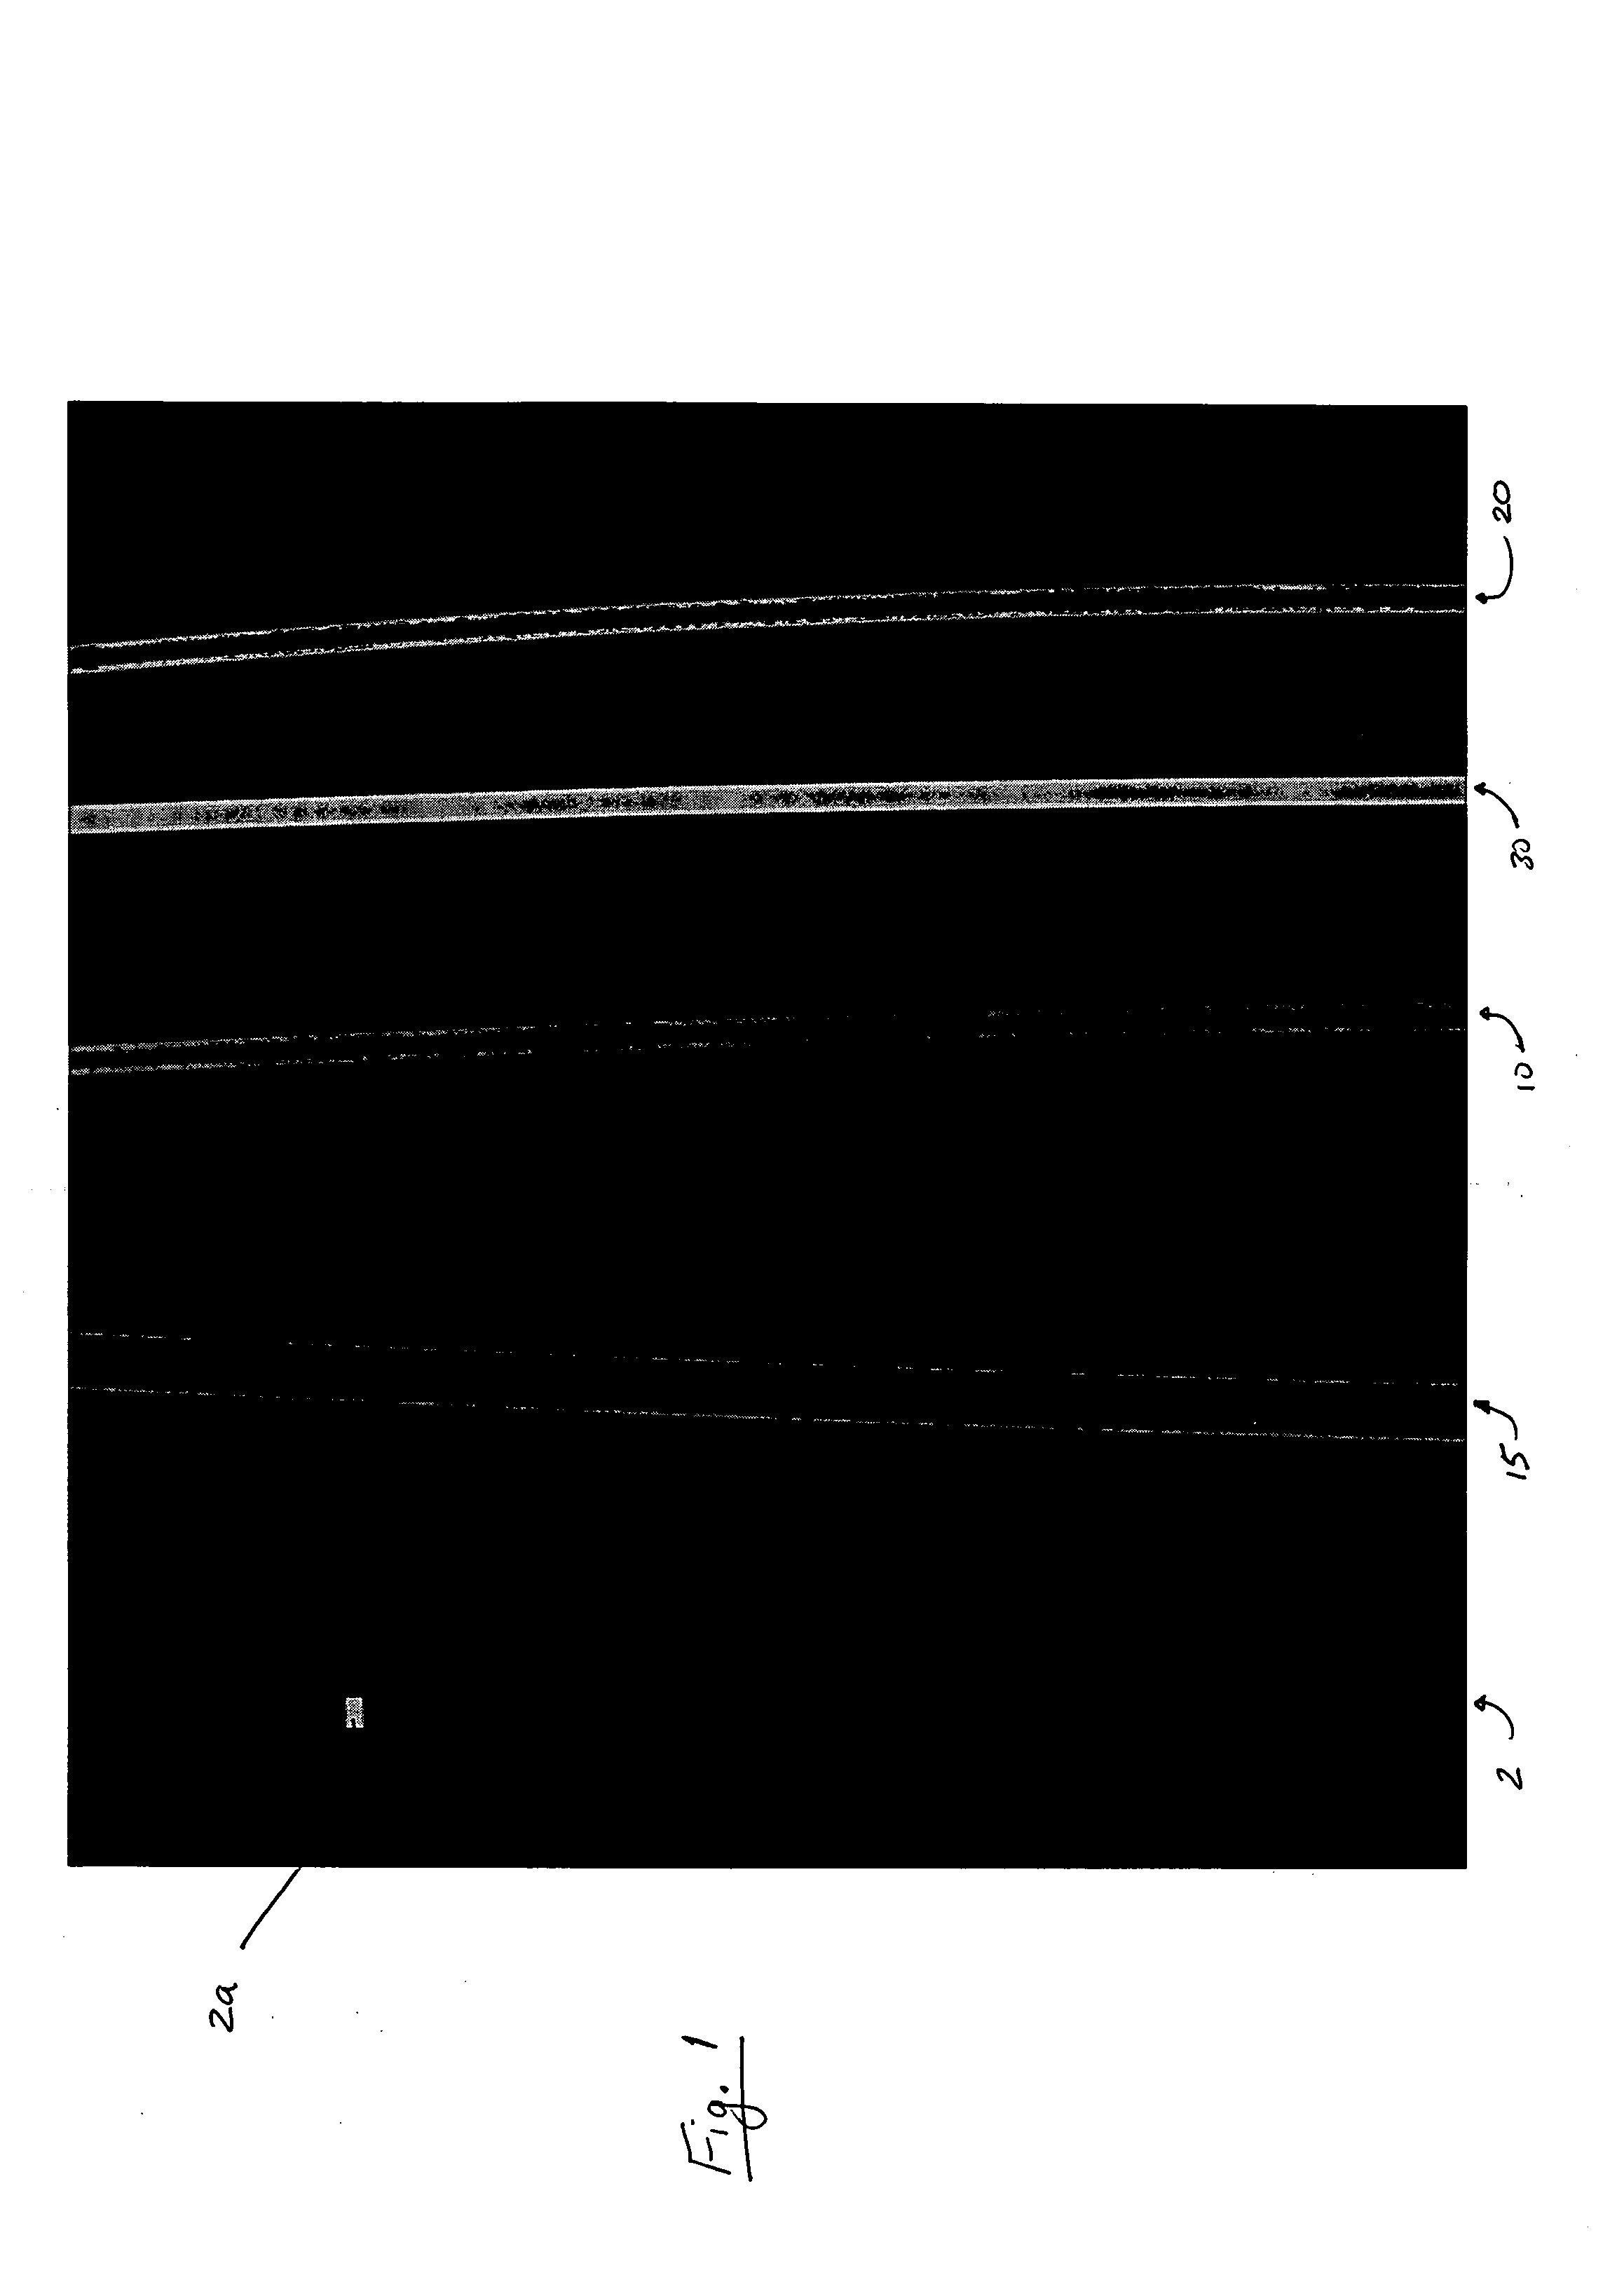 Radiopaque compositions, articles and methods of making and using same